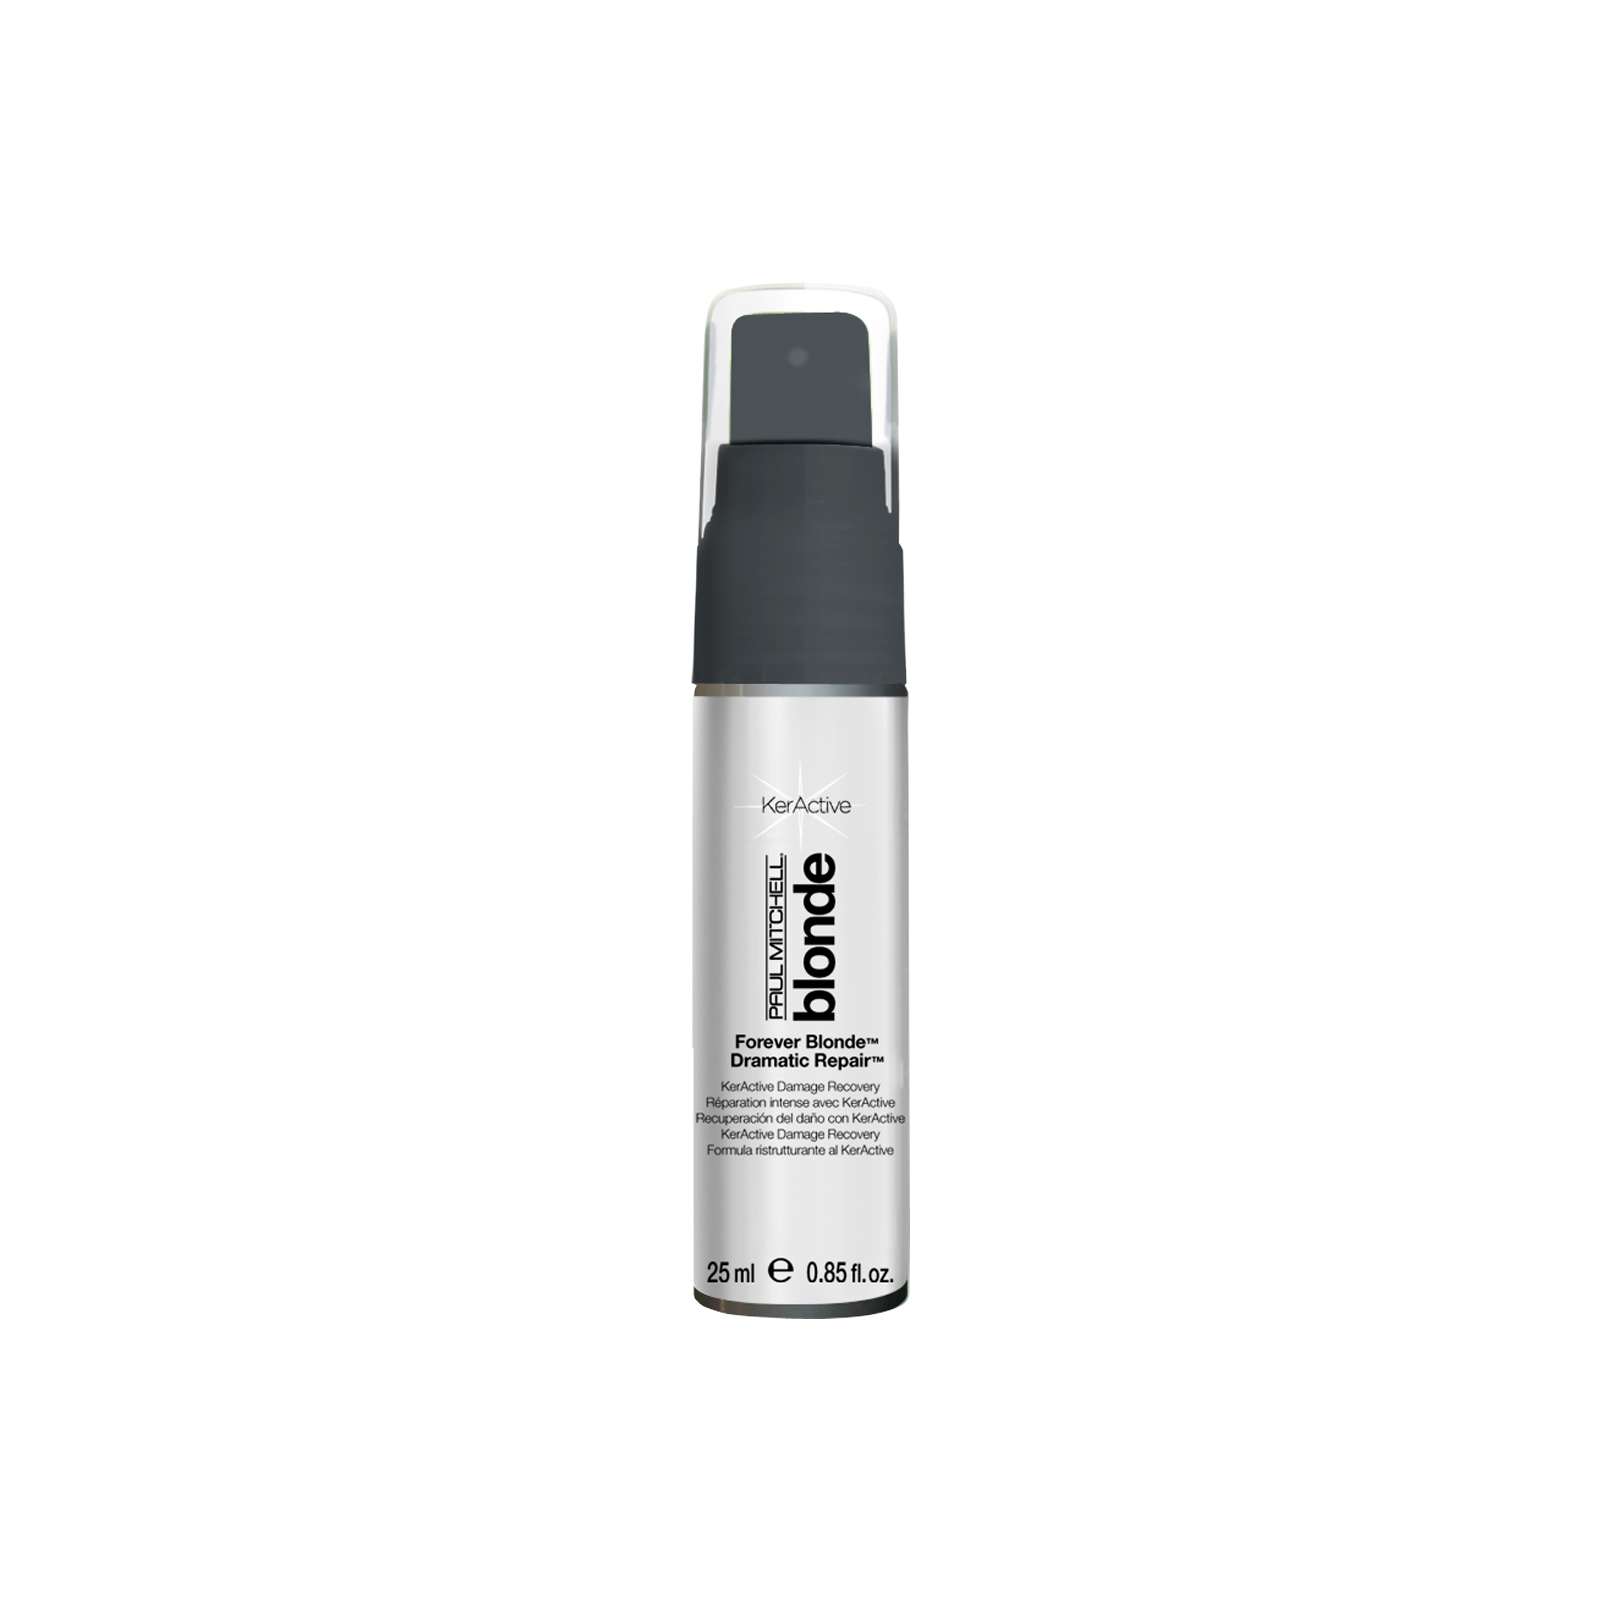 FOREVER BLONDE - Dramatic Repair Spray - Hypnotic Store